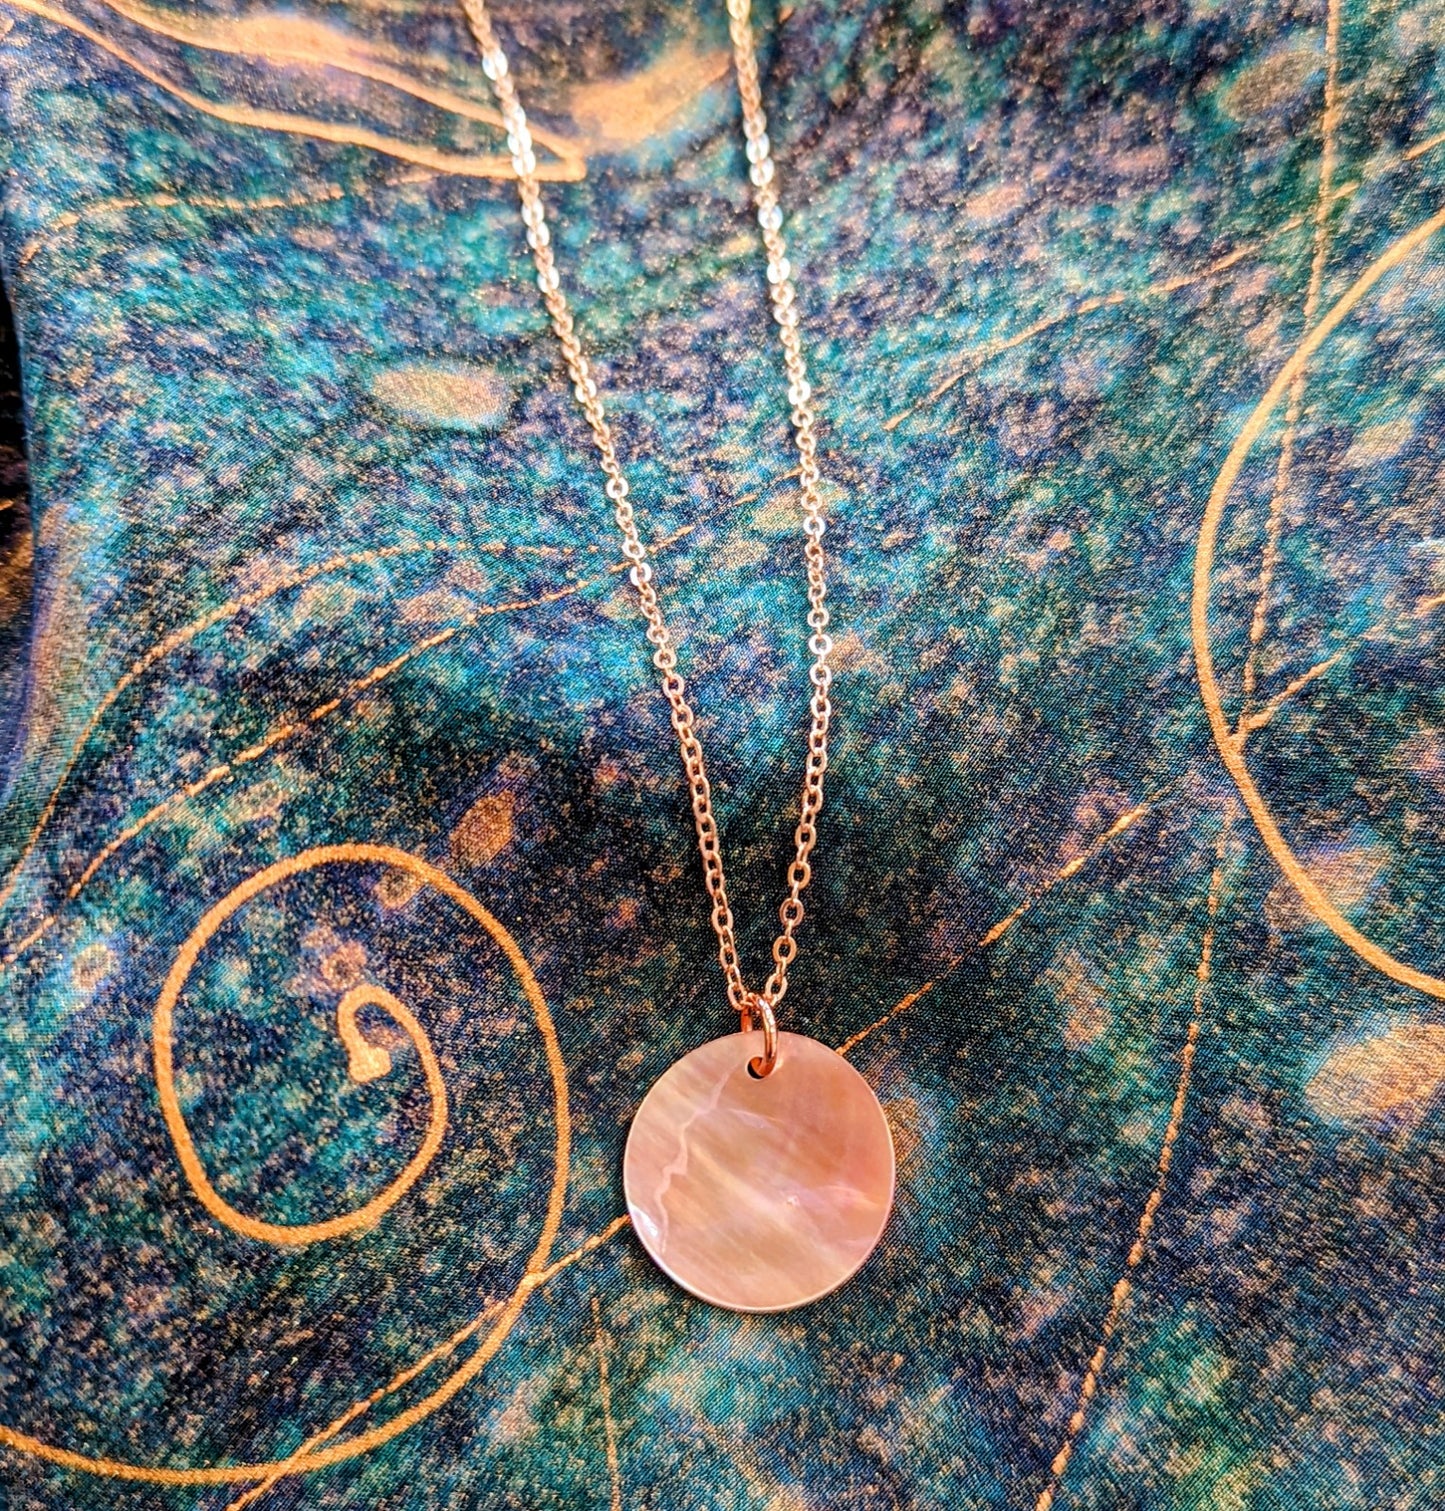 Strawberry Moon Necklace